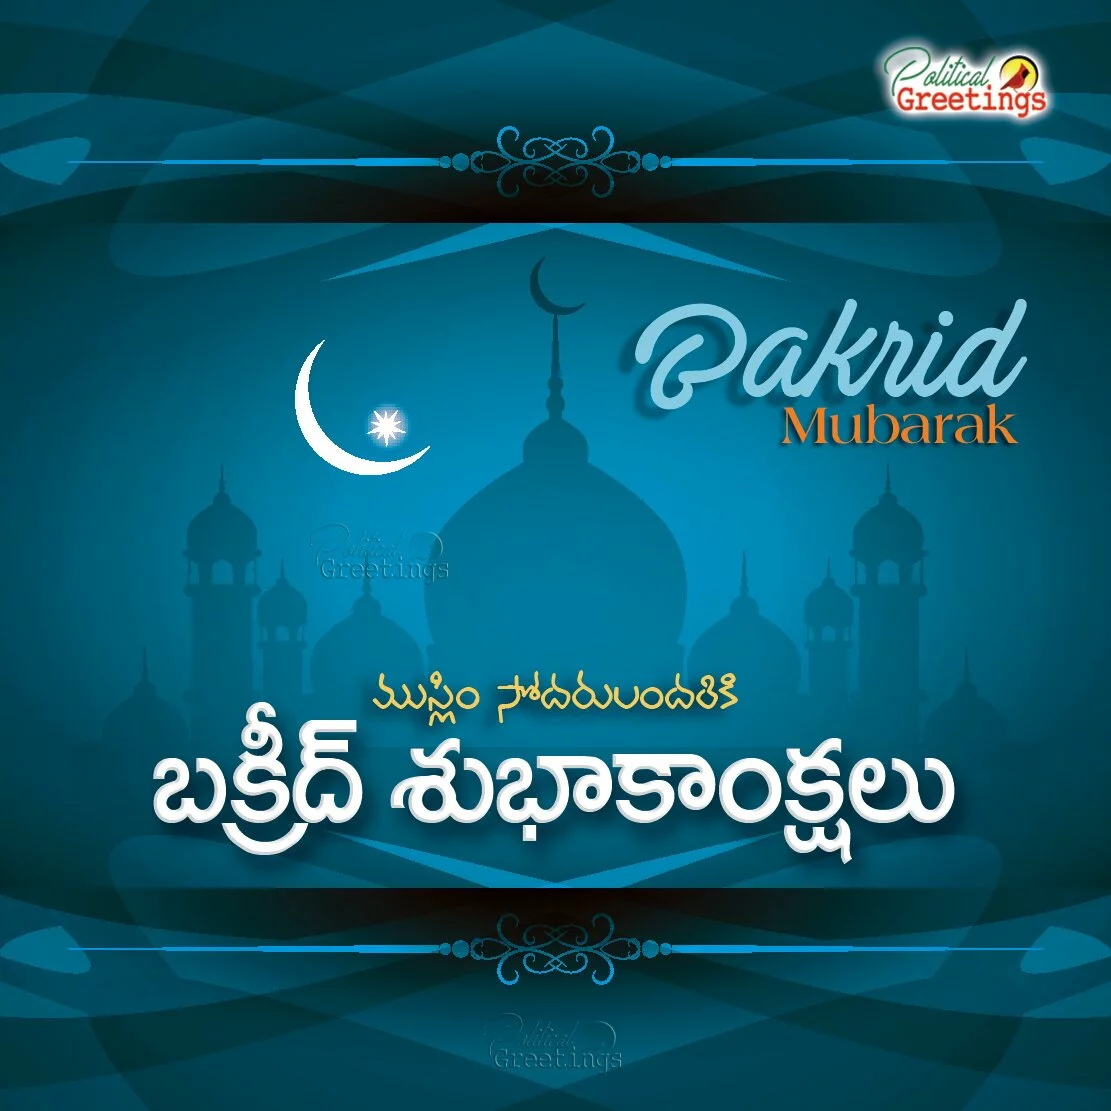 2017 Eid Ul- Adha(bakrid) Mubarak In Telugu With This Latest Images And Greetings Free Download